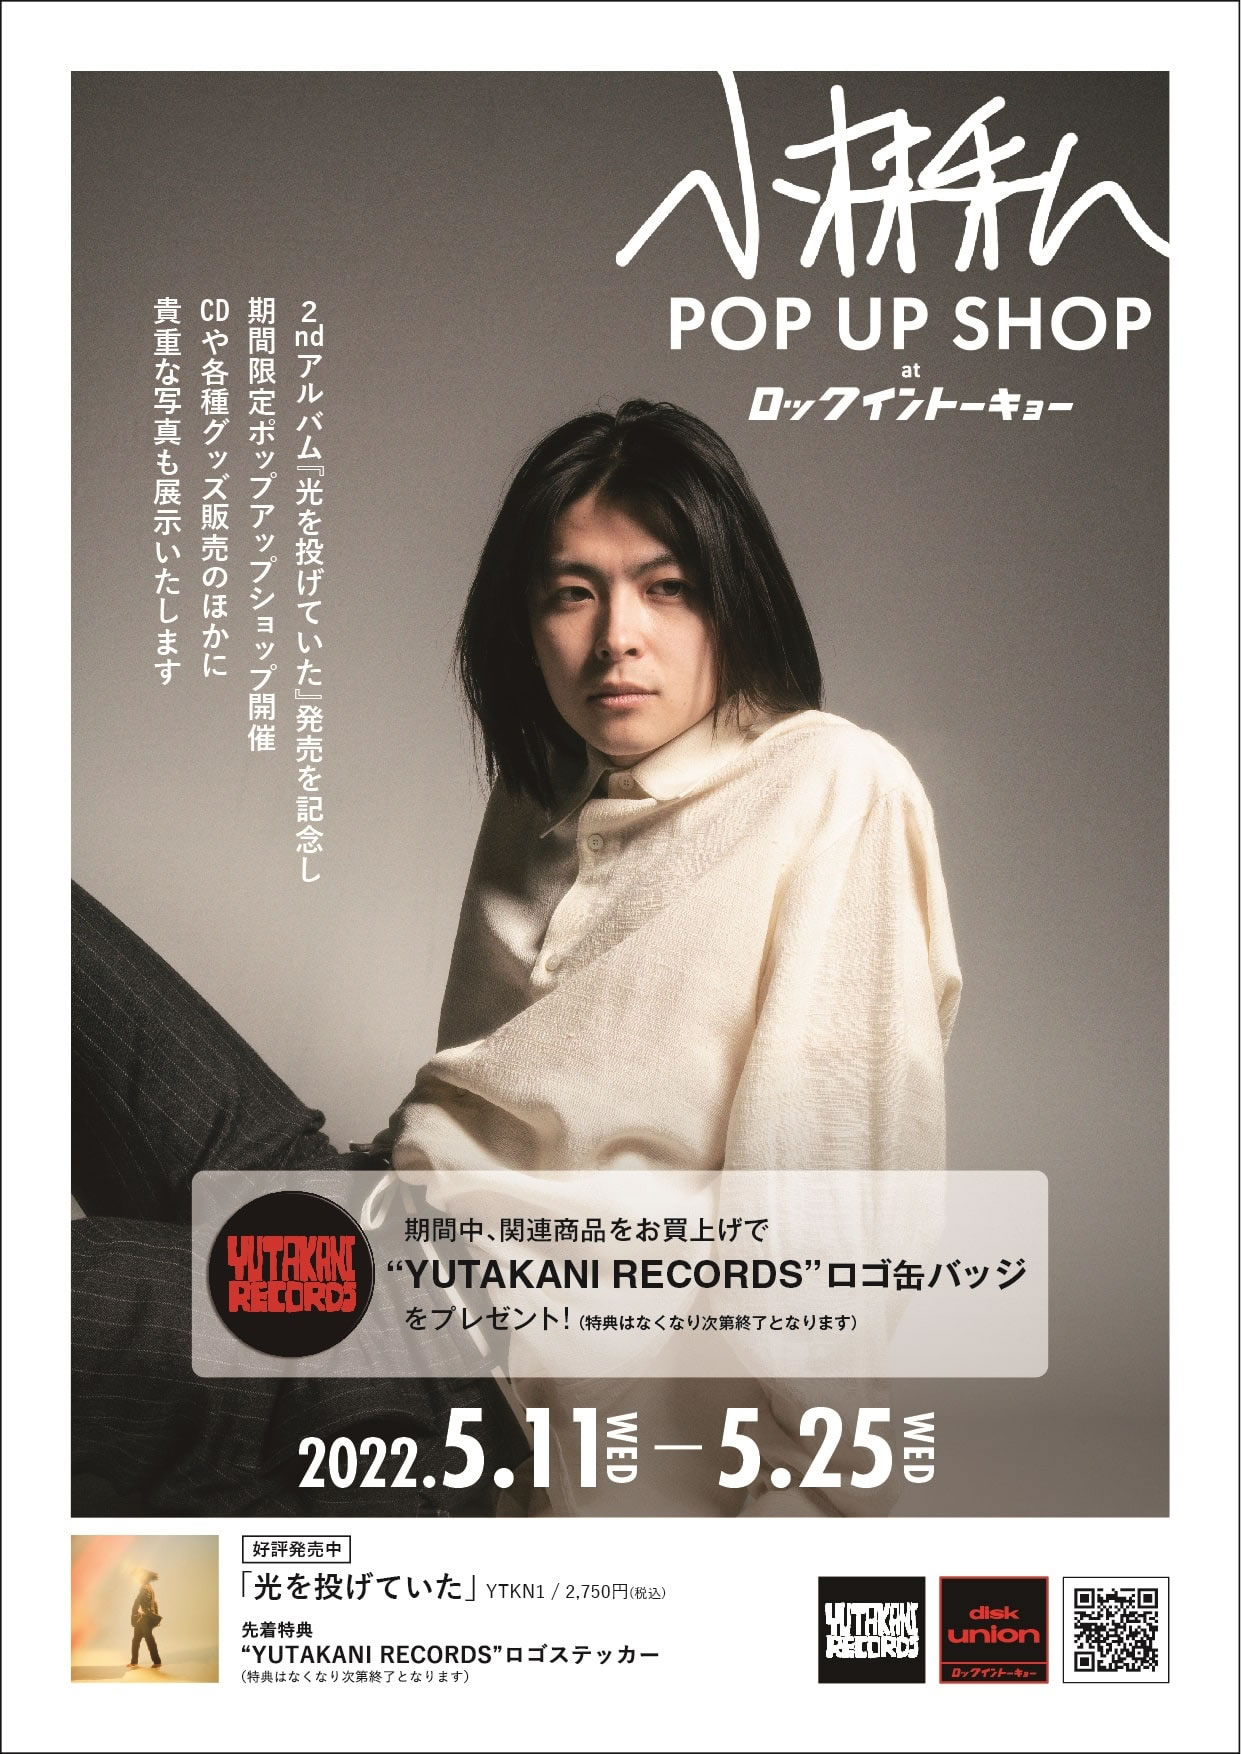 【ROCK in TOKYO】5/11(水)~5/25(水) 「小林私 POP UP SHOP at ロックイントーキョー」